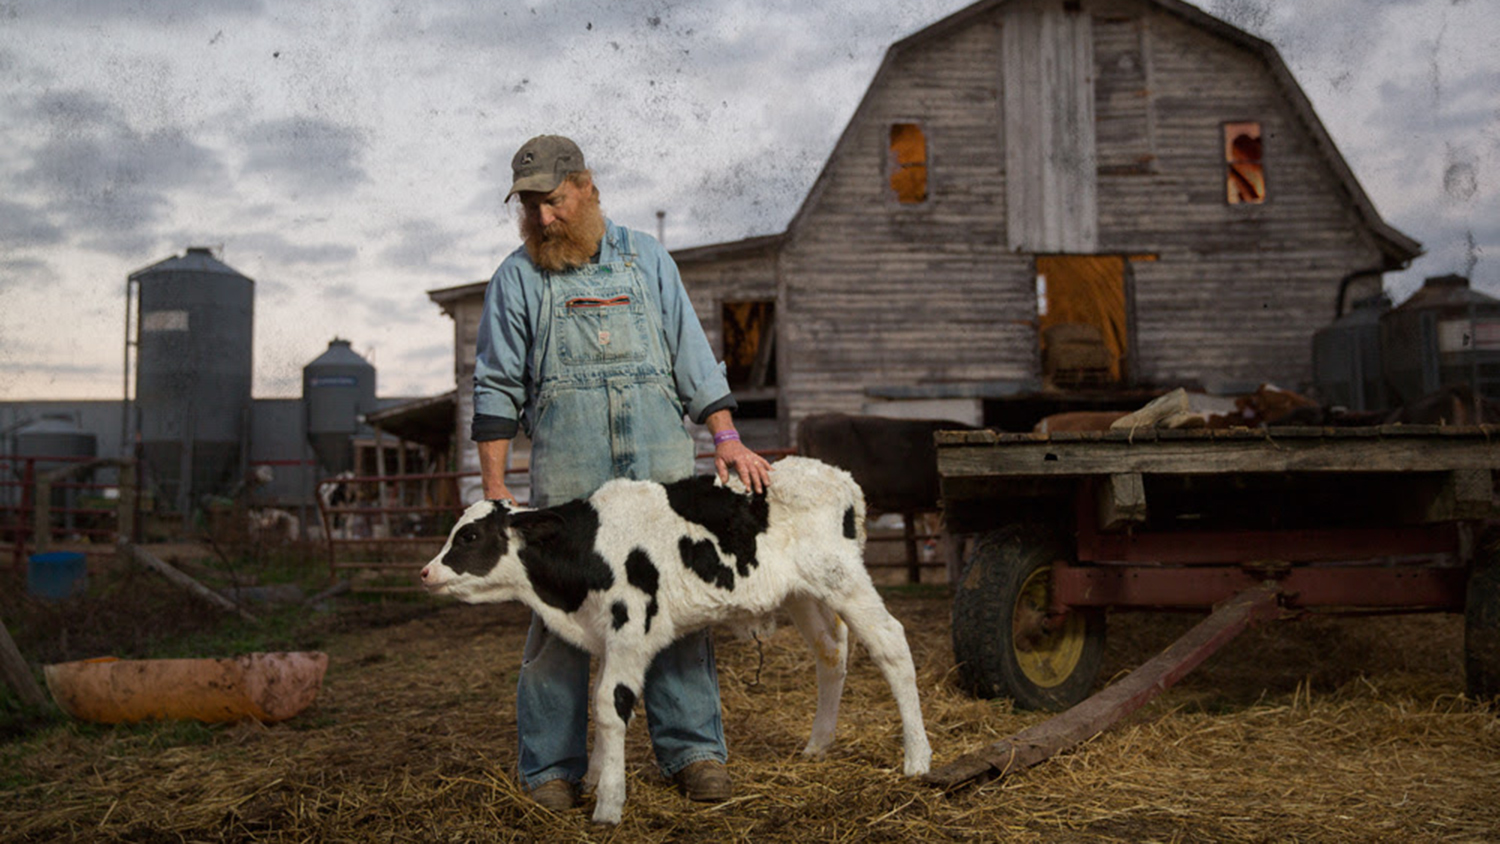 A farmer in overalls in front of a barn petting a calf